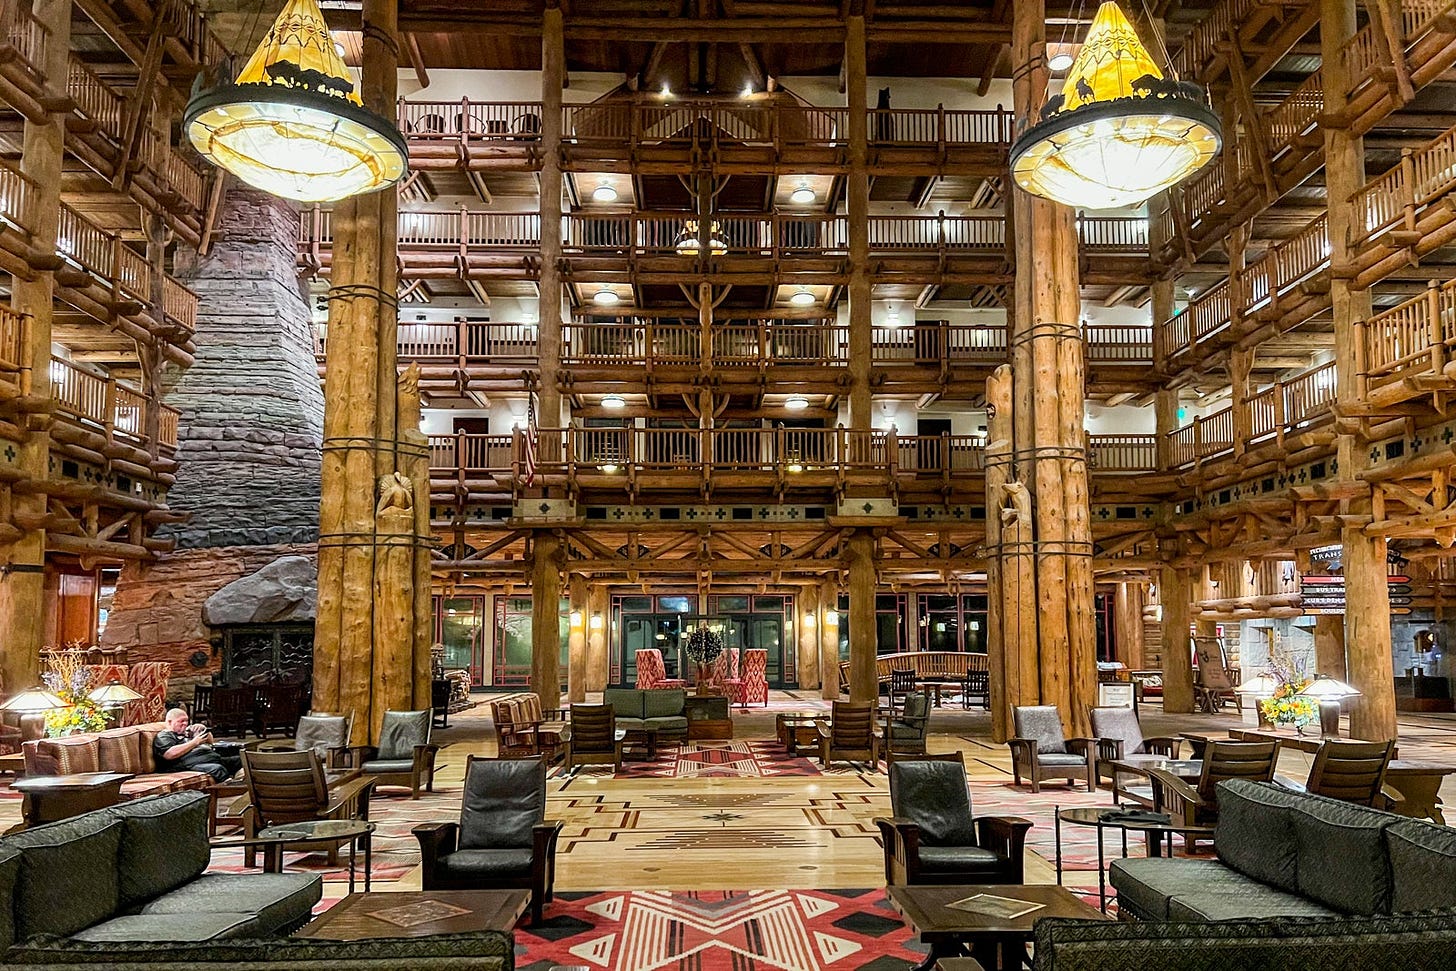 Review of Disney's Wilderness Lodge - The Points Guy